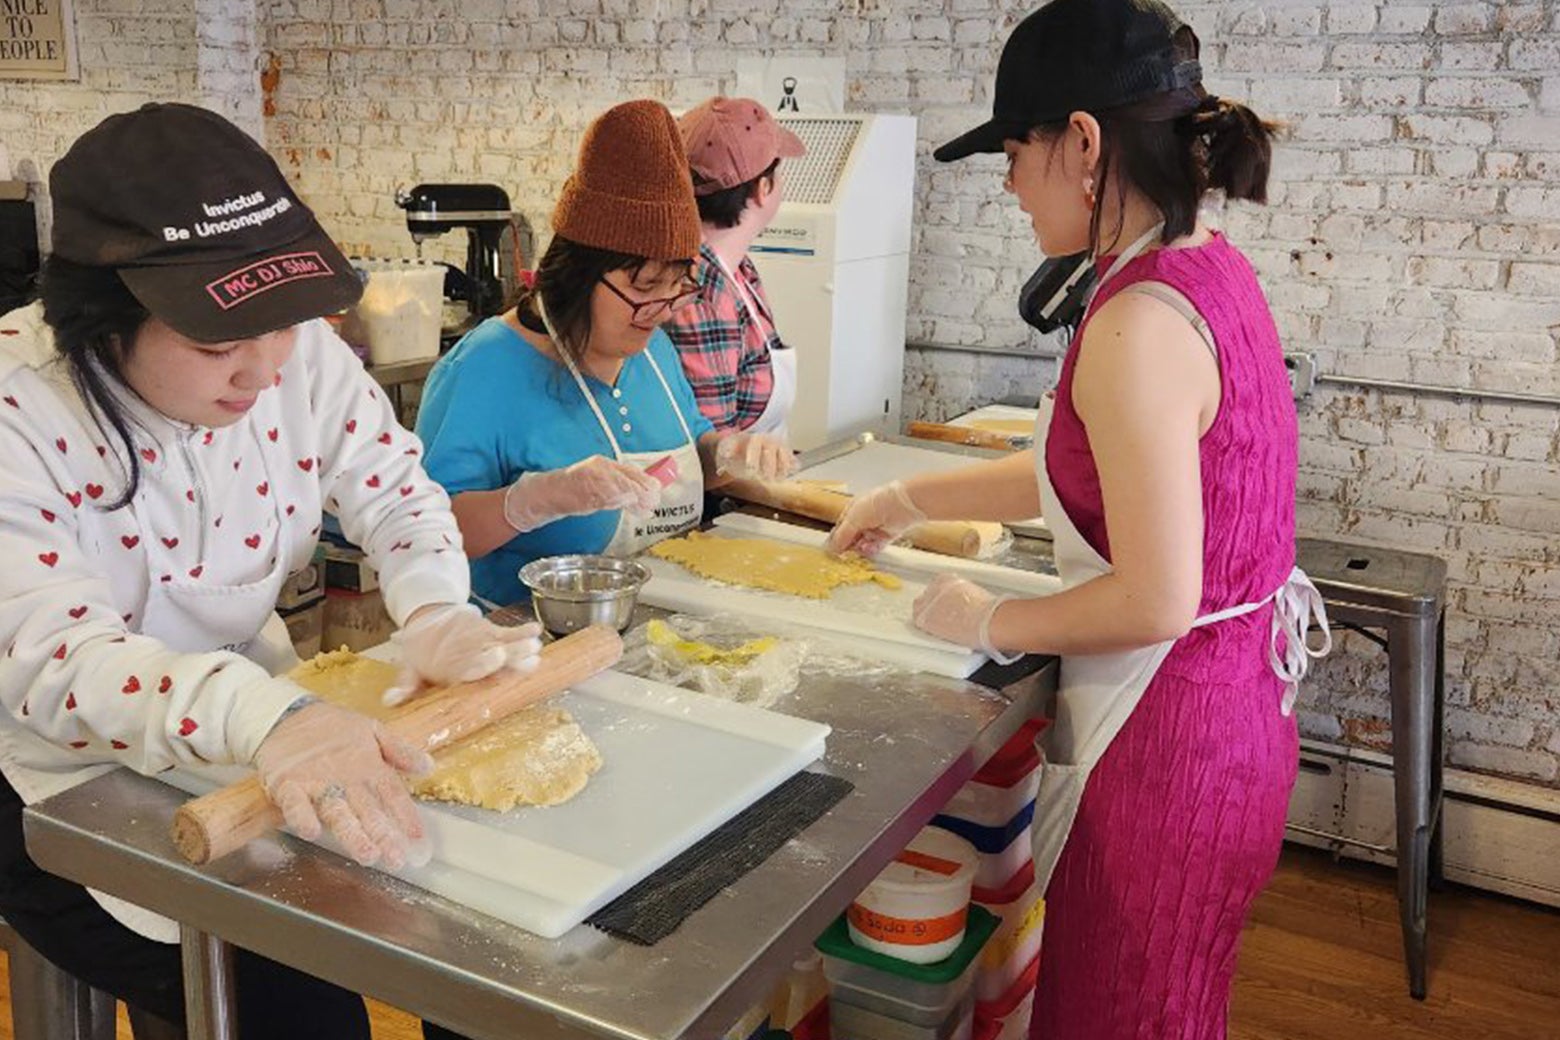 Invictus Bakery Shows Us What an Inclusive Workplace Can Look Like